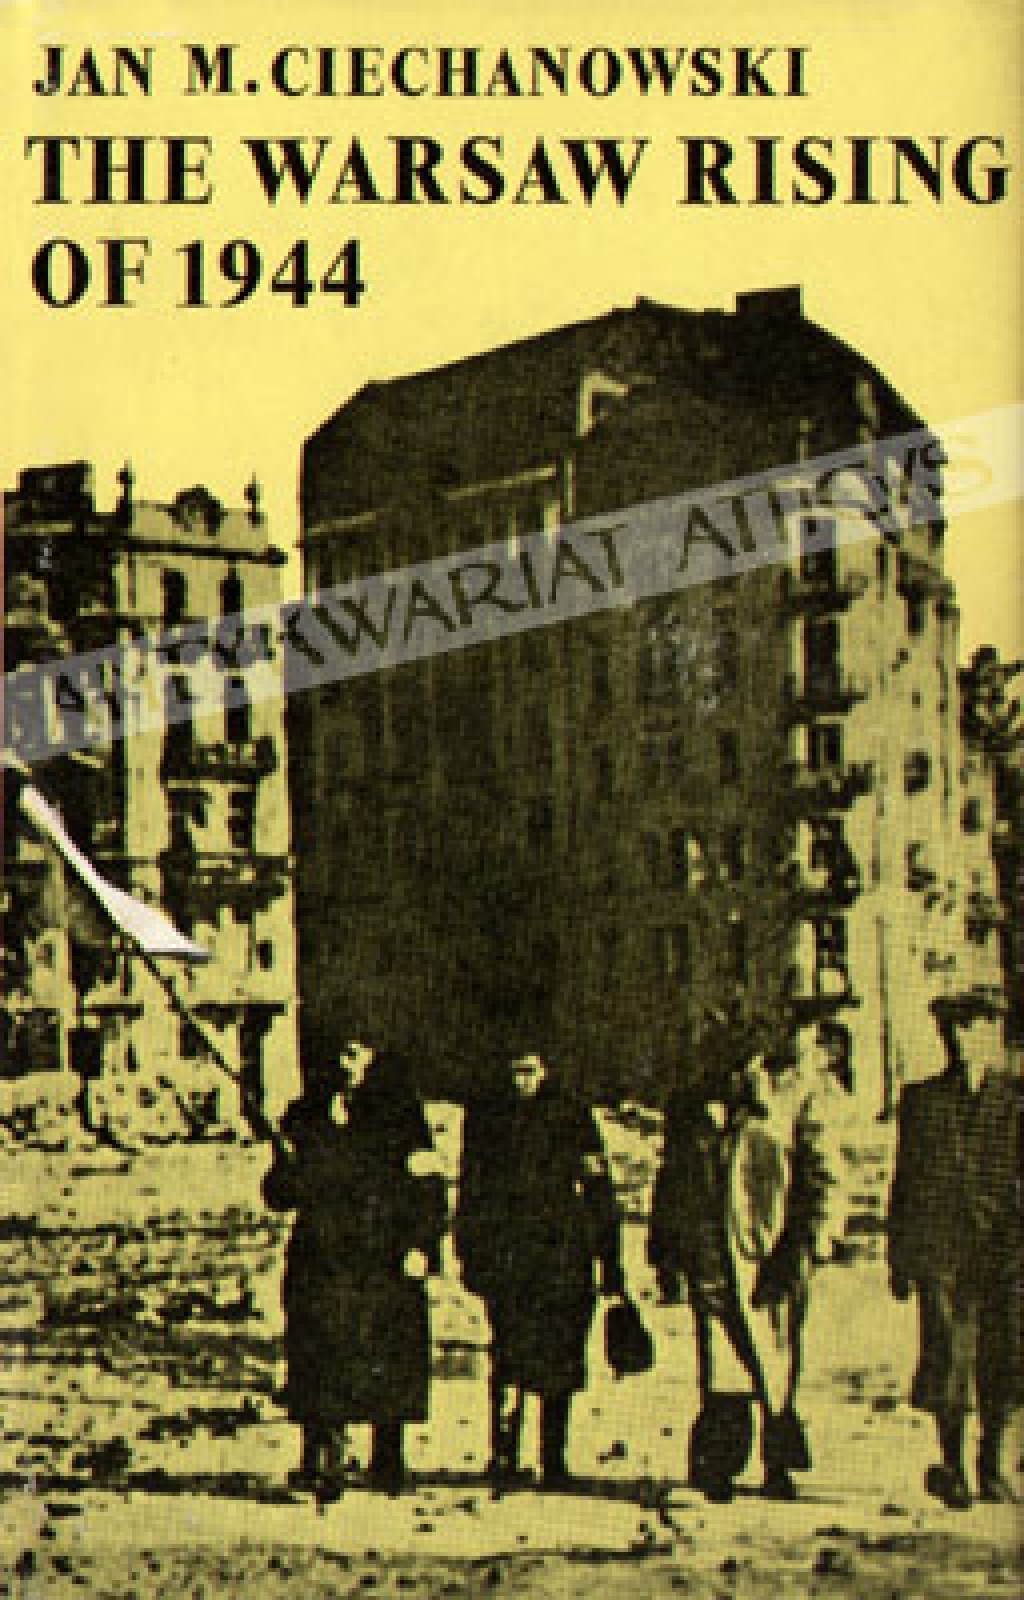 The Warsaw Rising of 1944